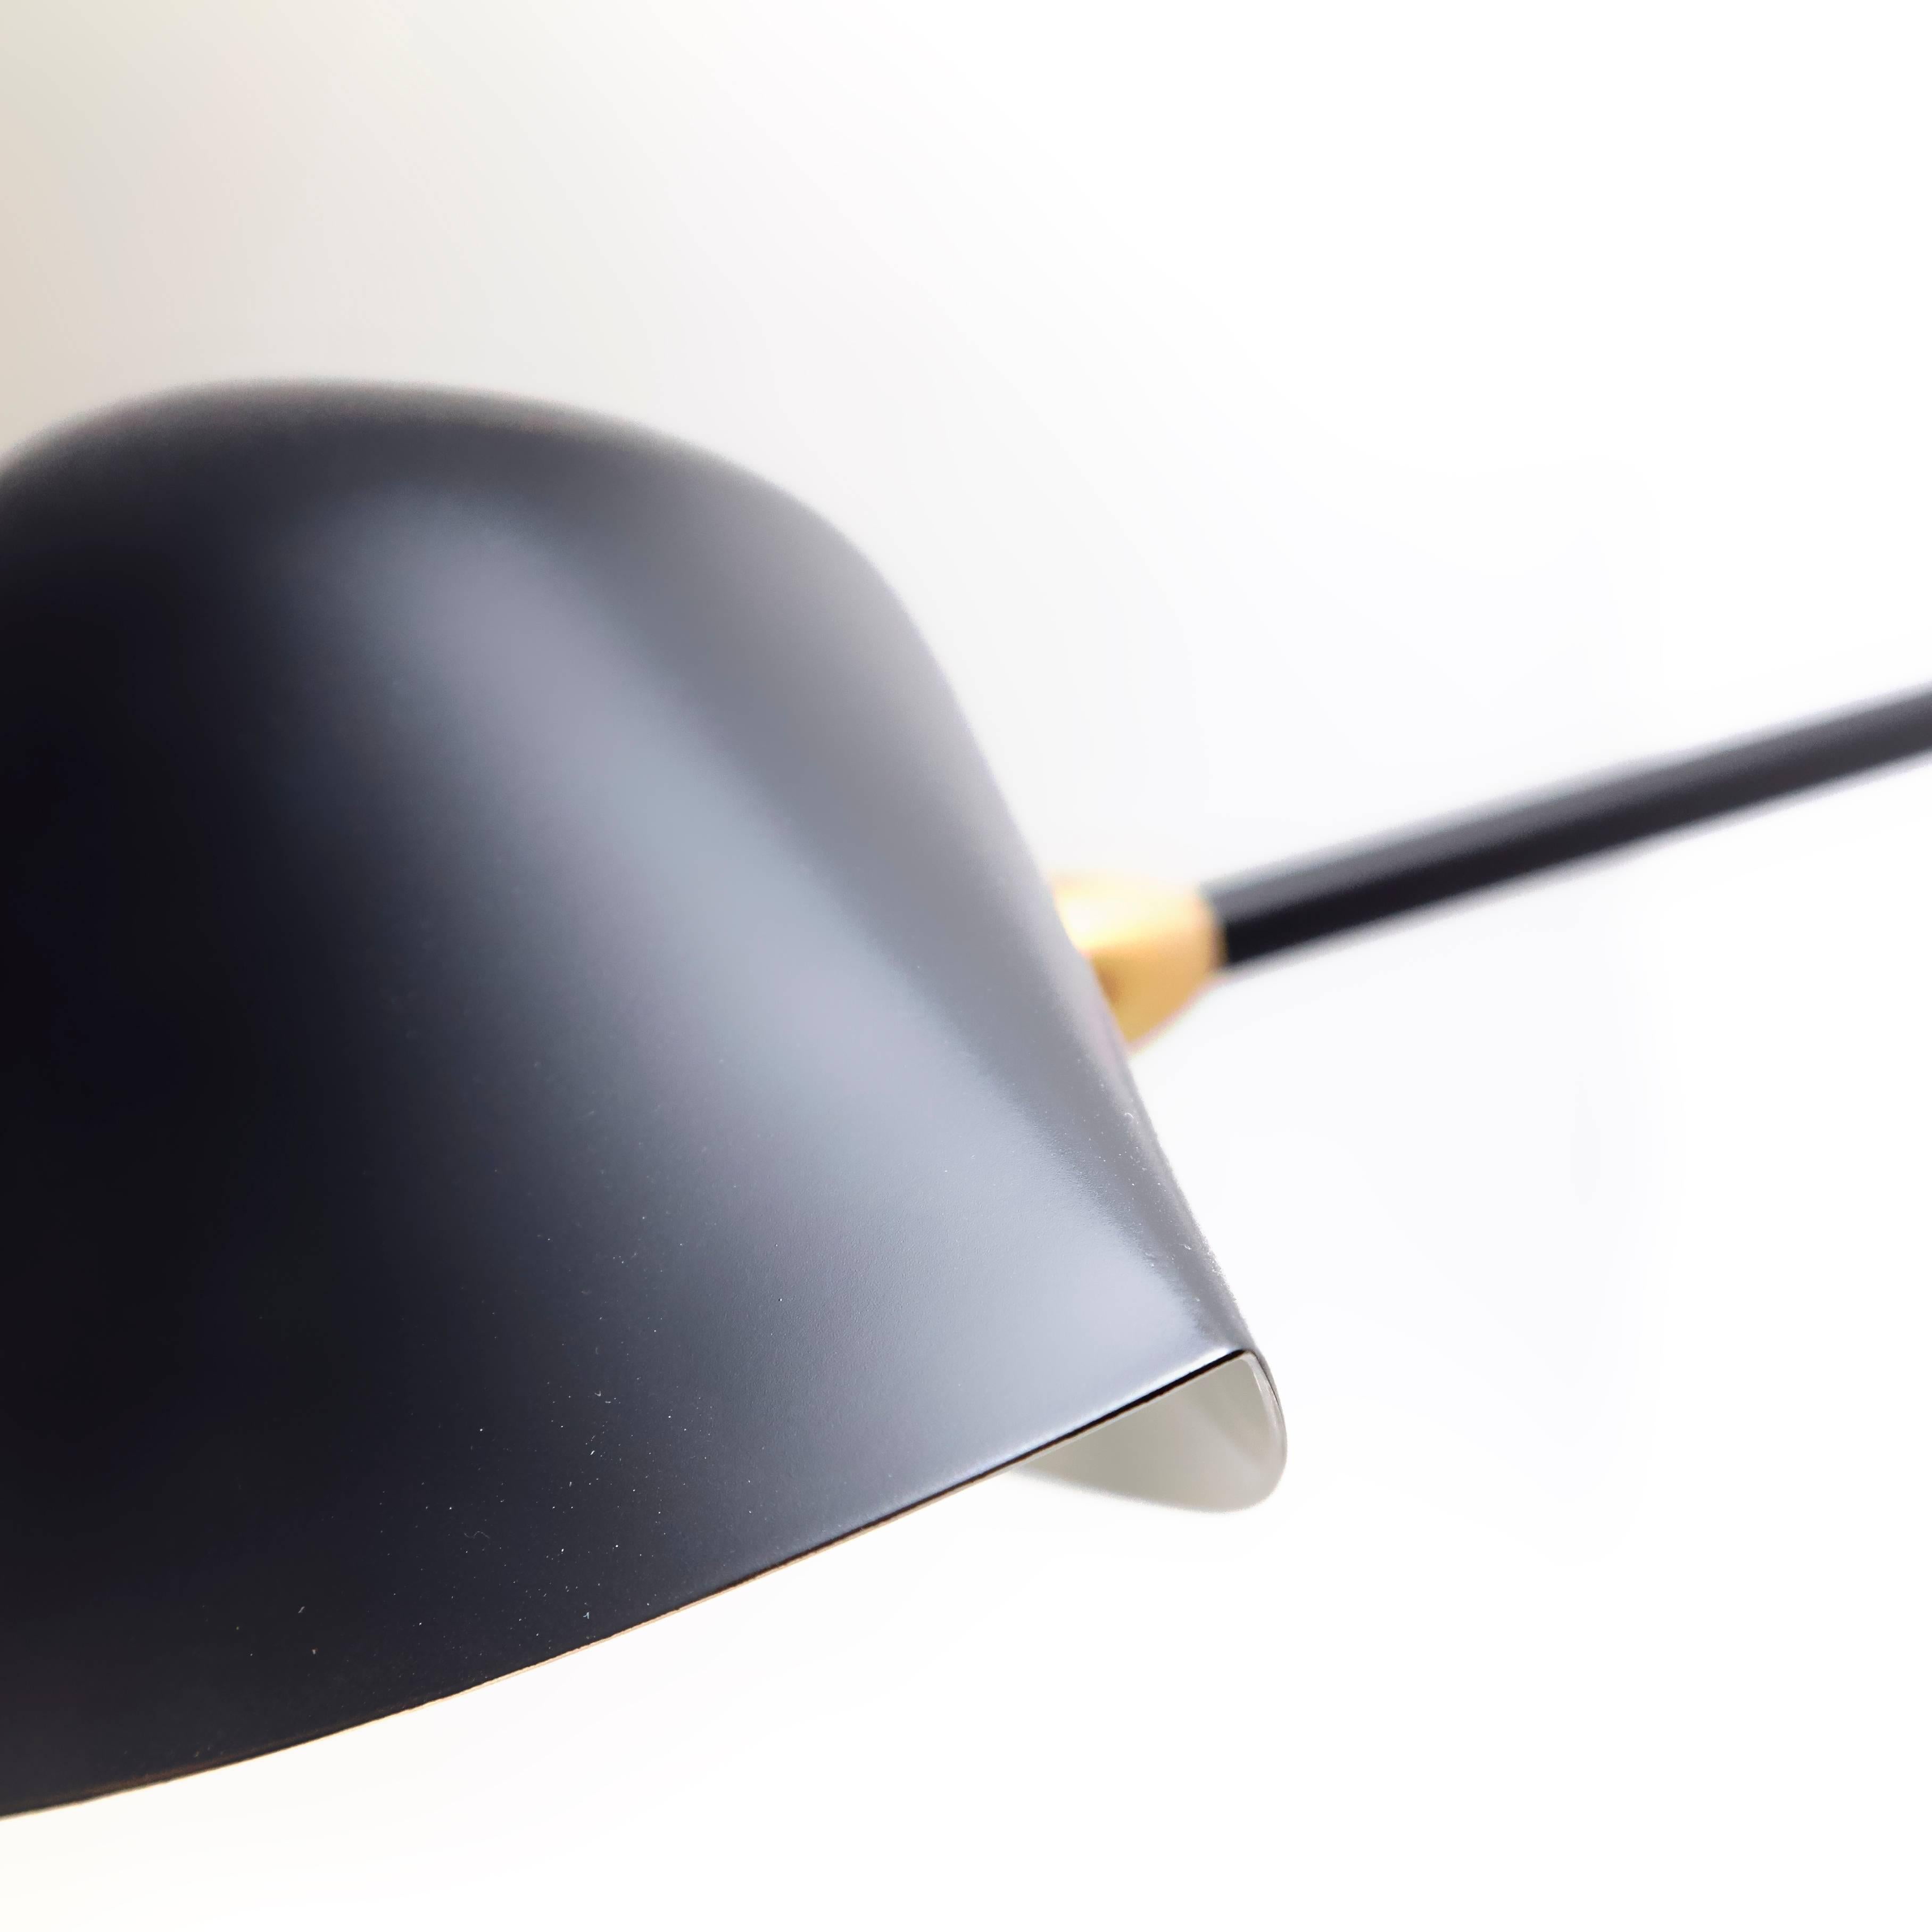 French Serge Mouille Mid-Century Modern Black Anthony Wall Lamp Whit Fixing Bracket For Sale